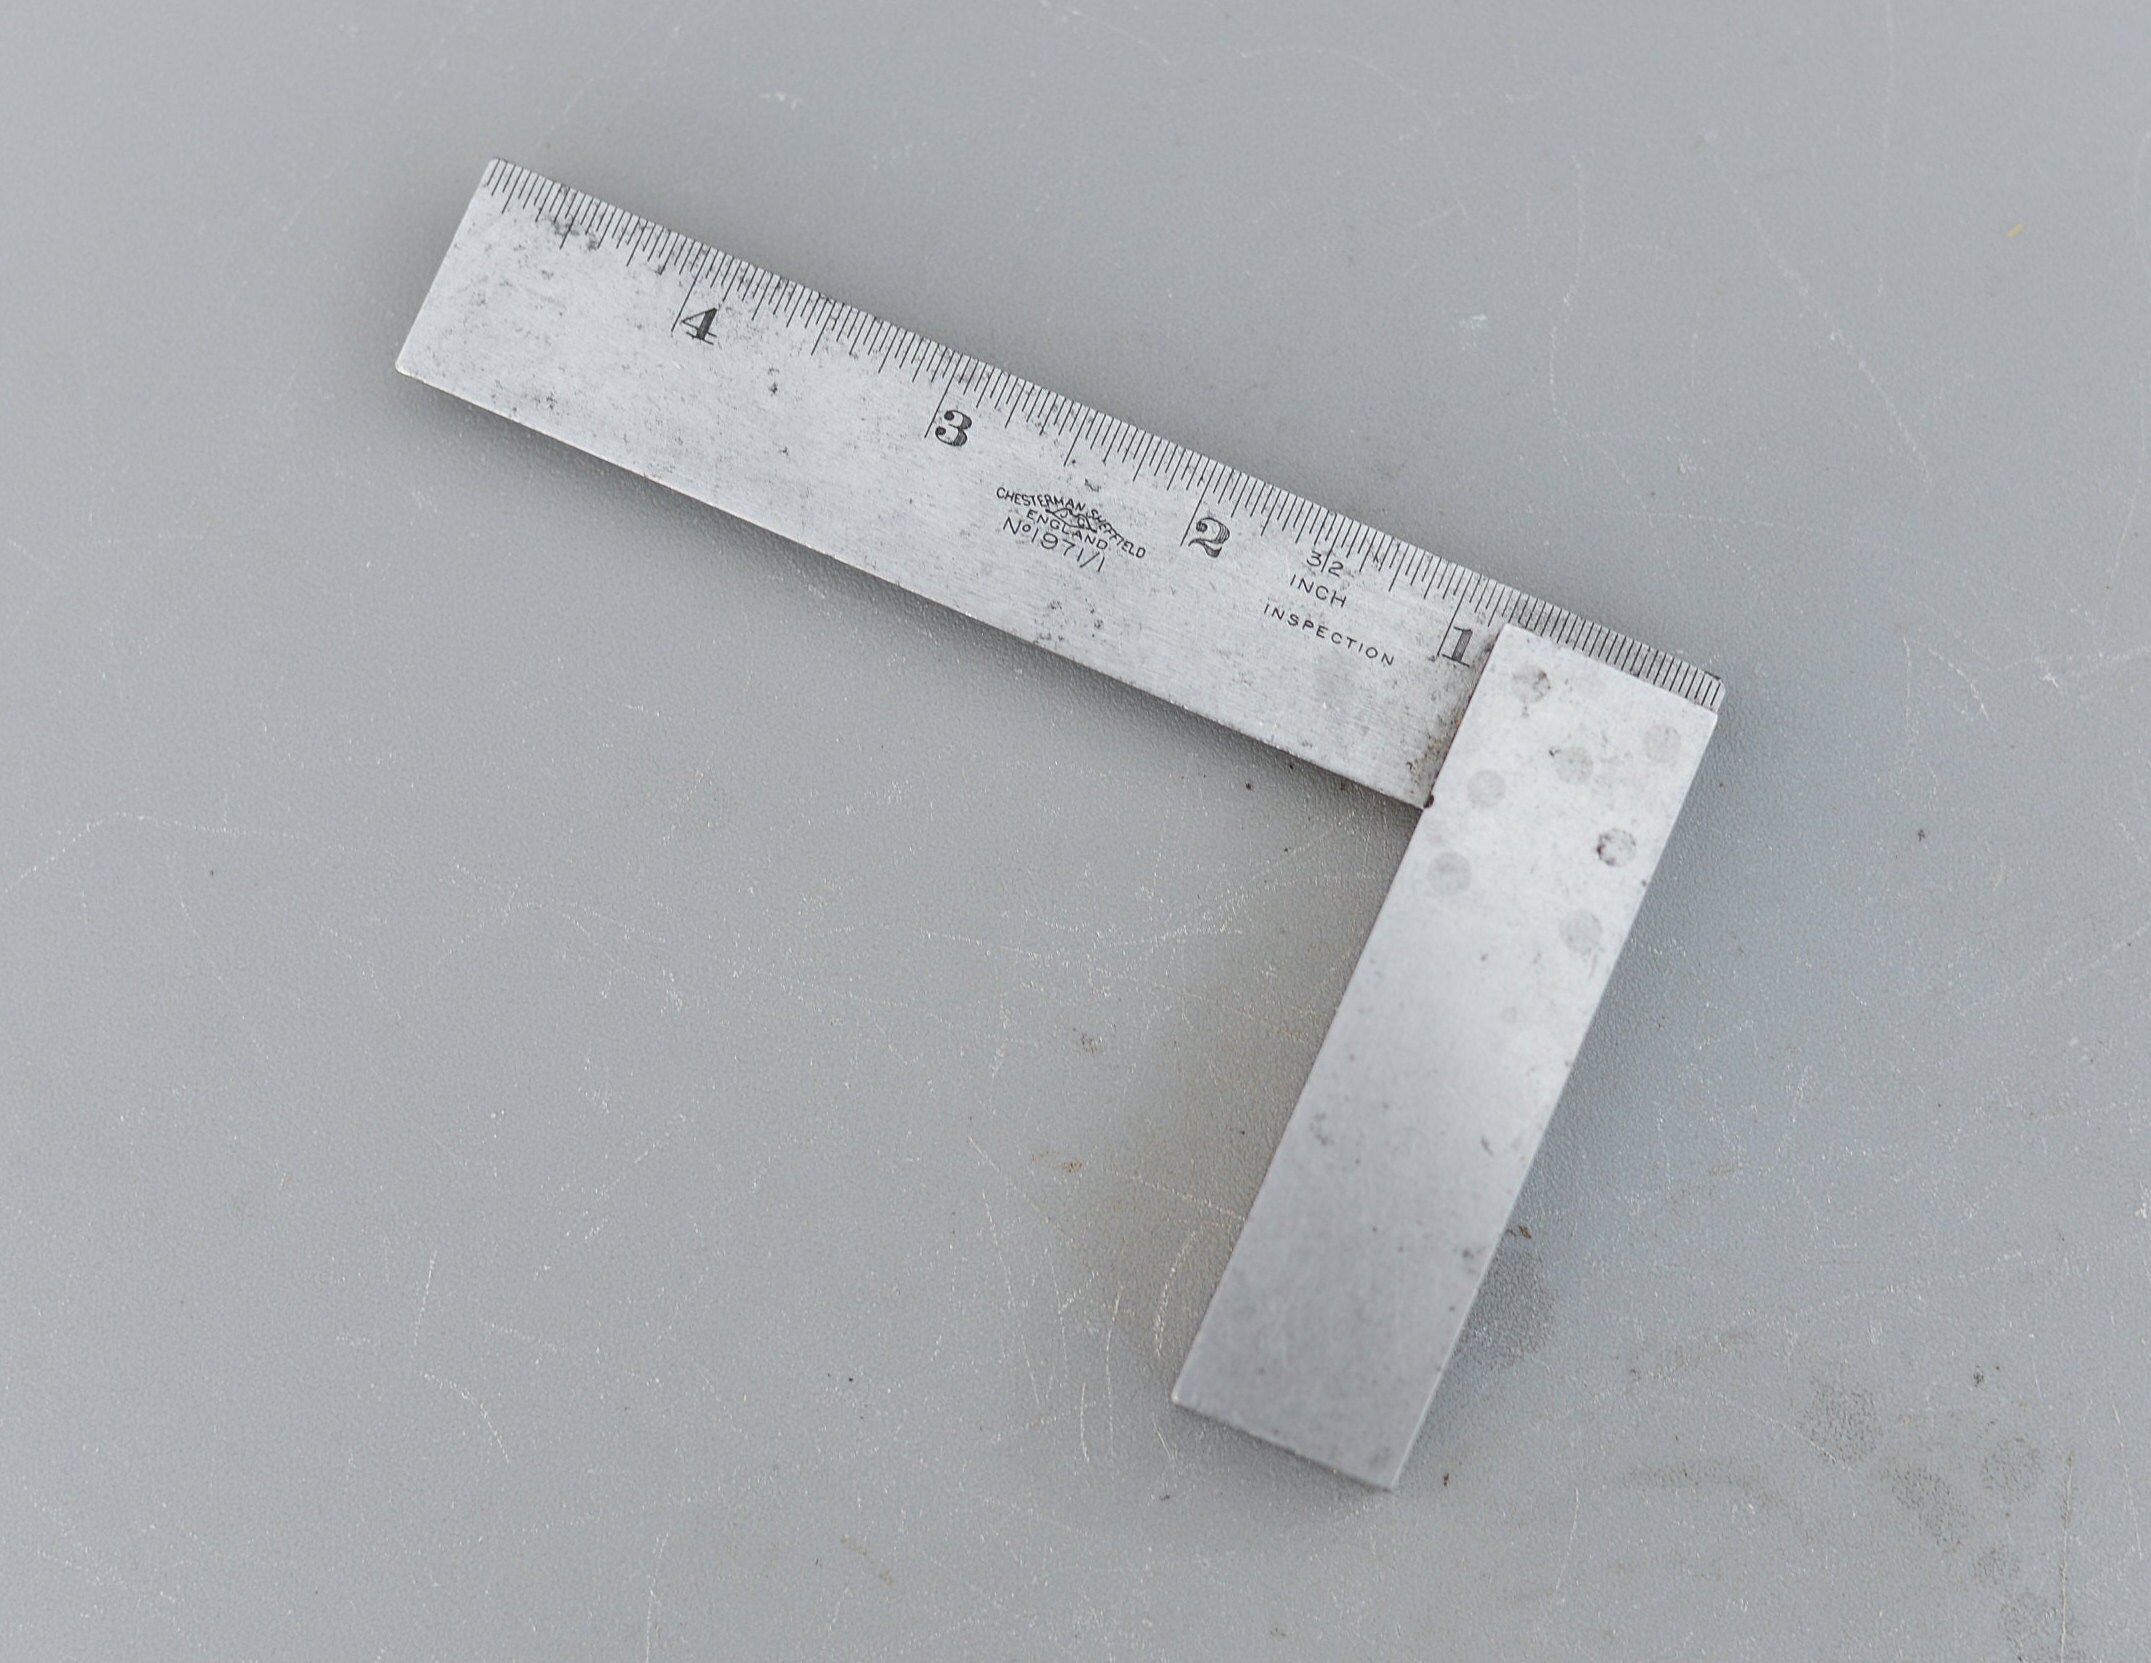 3 Inch 75mm Engineers Square or Machinist Square Ruler T Square Try Square  Carpenter Carpenter Engineer T Square 